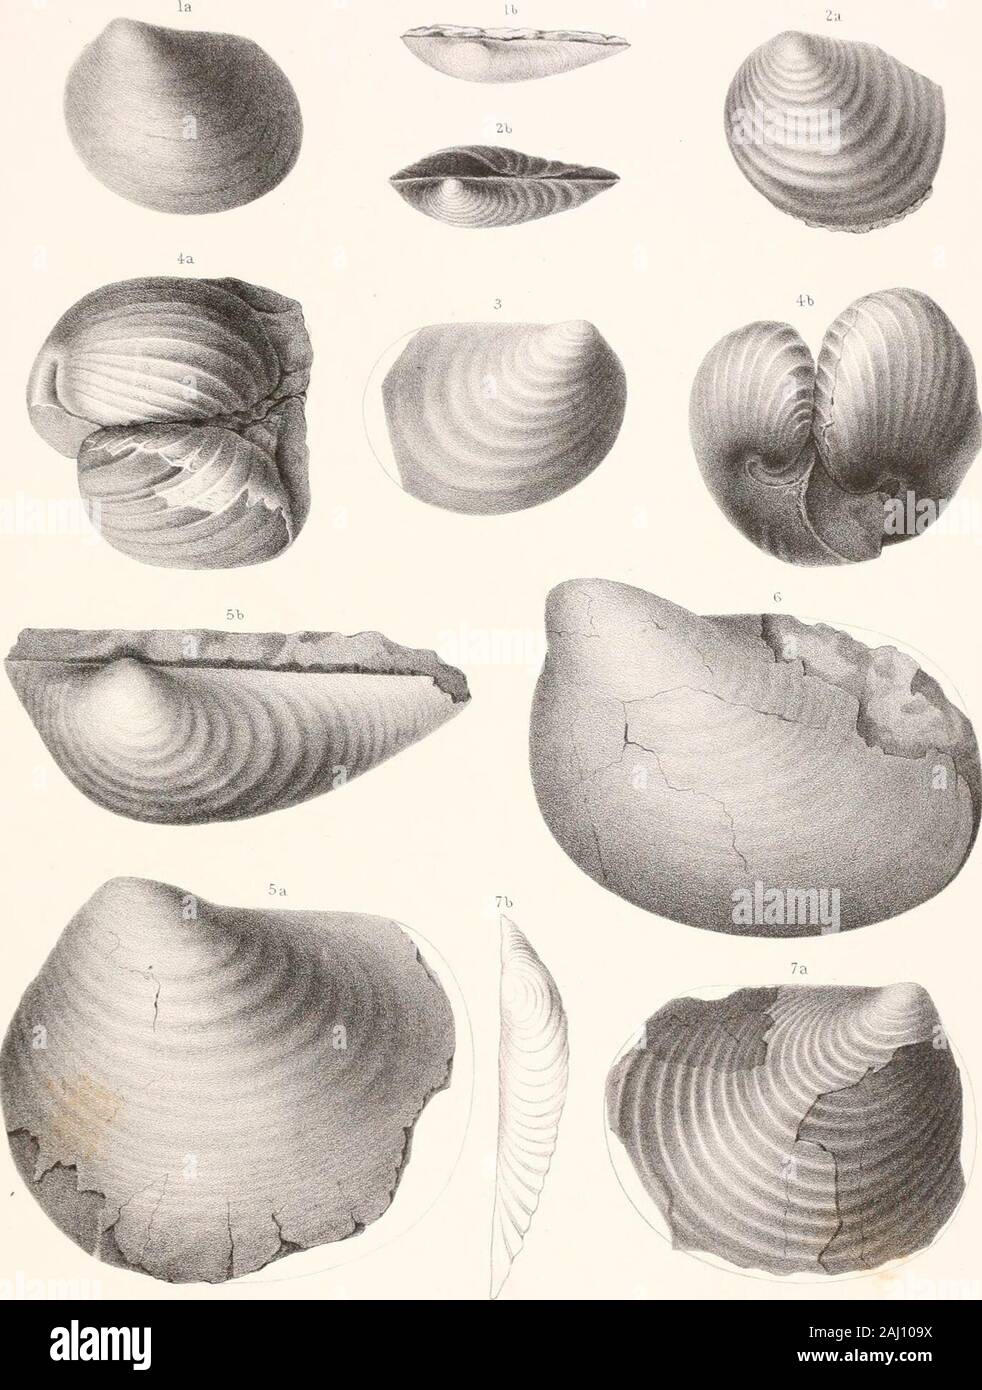 Report of the United States Geological Survey of the territories . 55 .;, a. A left view of a specimen, retaining the inner pearly layer (type of the rar.).•2, b. A dorsal view of the same. Fie;. 3. Inocekamus Cripsii, var. Barabini 49 A right-side view of a small specimen. Fig. 4. Inoceramus incurvus 01 4, a. A dorsal view of the ty^e-specimeu, with the opposite (but imperfect) valves lying to-gether and retaining portions of the inner layer. 4, b. A somewhat different view of same. Fig. 5. Inocekamus convexus 51 5. u. Side view of an imperfect left valve, retaining portions of inner layer.5, Stock Photo